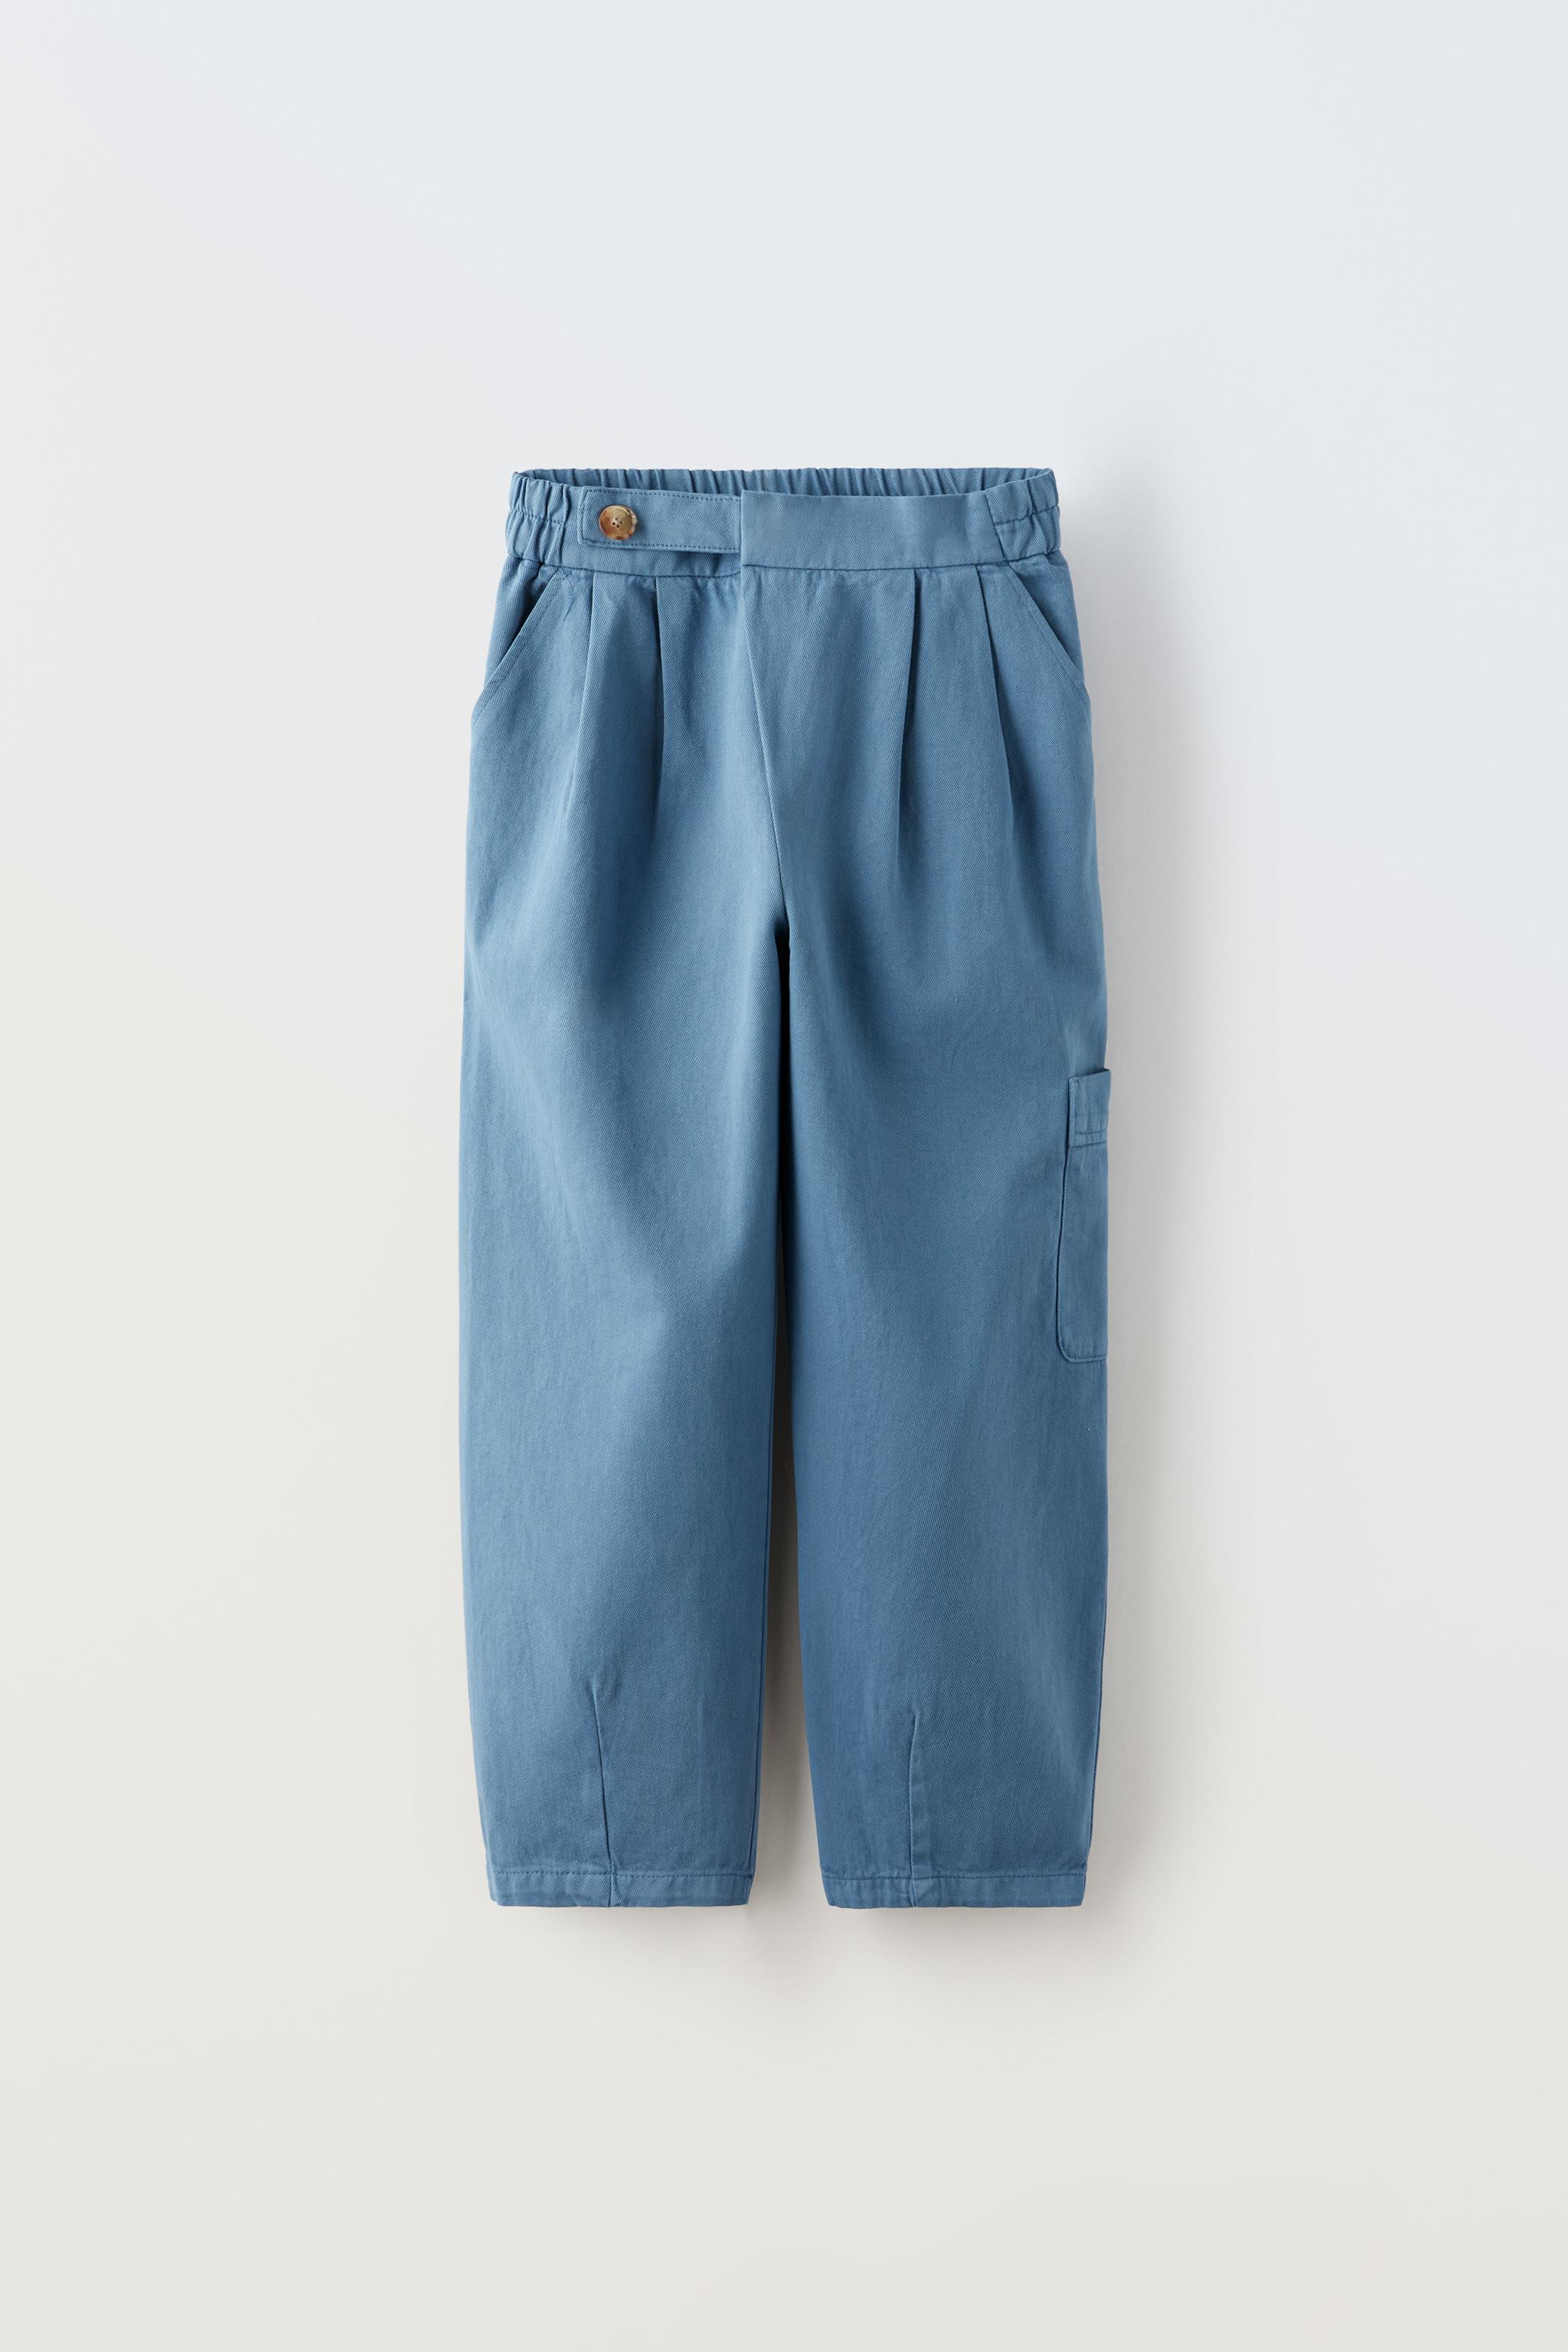 Comfortable Navy Blue Knit Trunks by Uniqlo